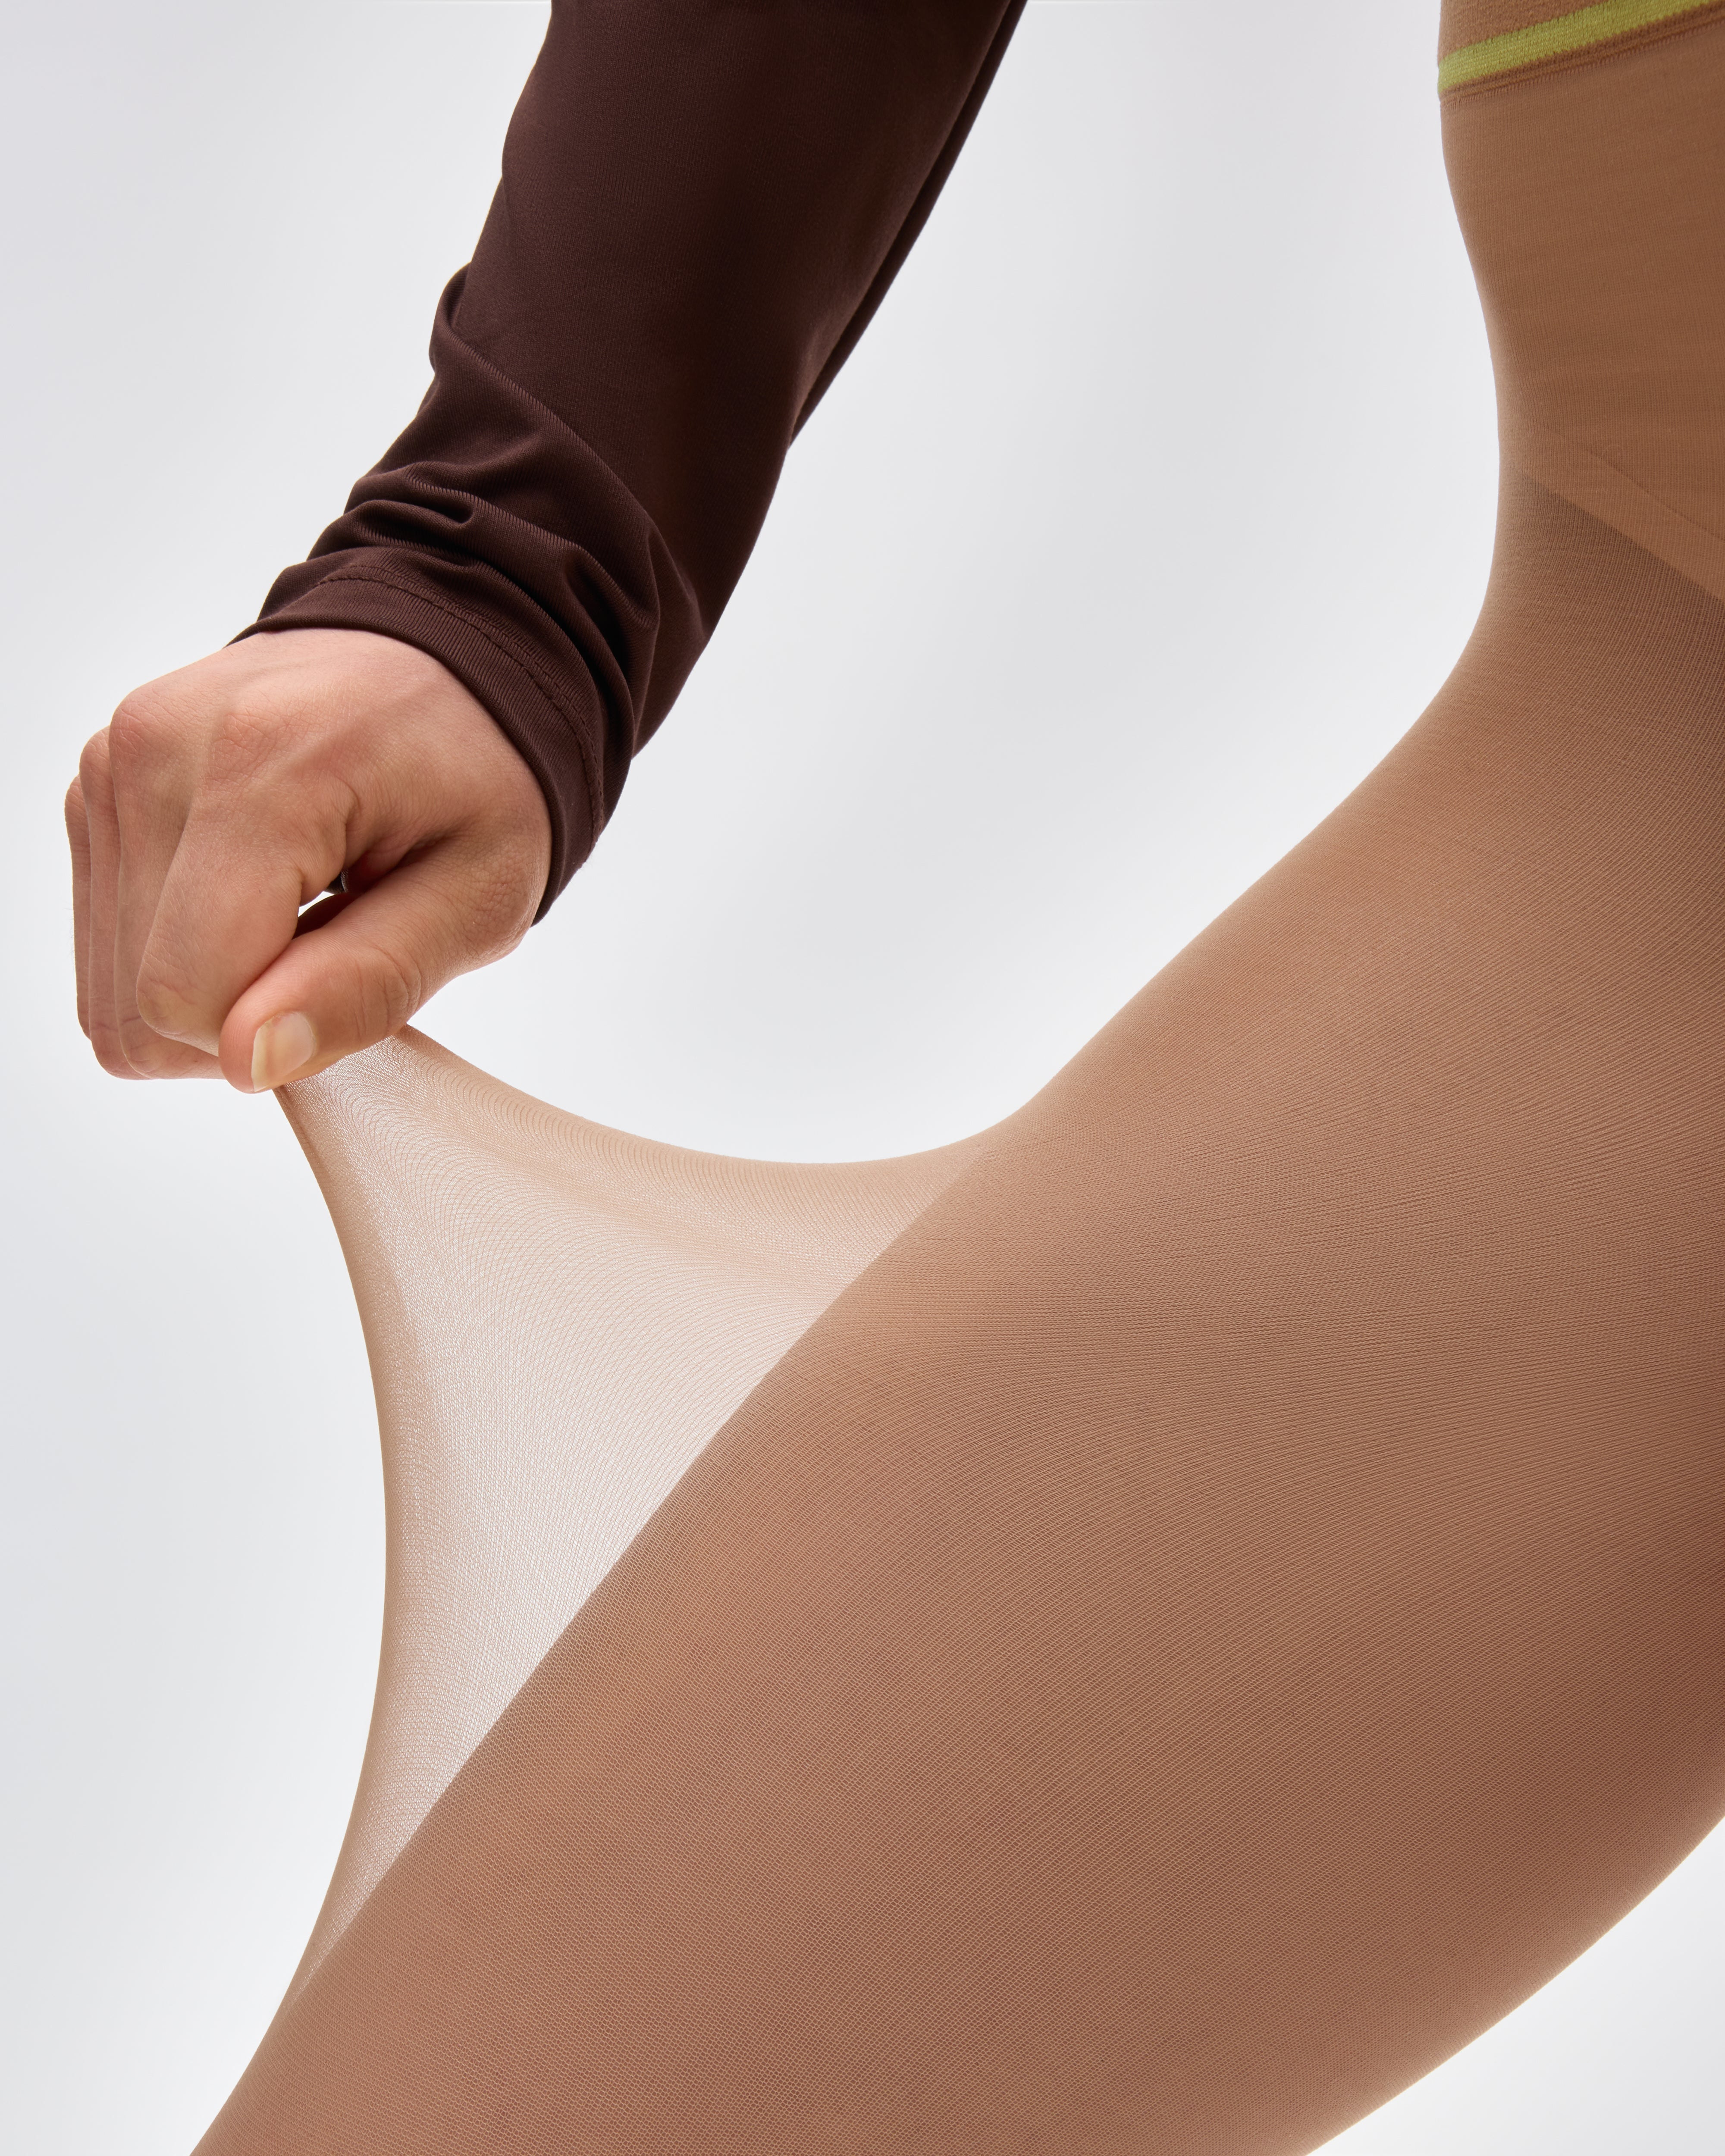 null, Collants nus ultra transparents et résistants aux déchirures, nude-ultra-sheer-tights, sheertex, product image, unbreakable tights, model